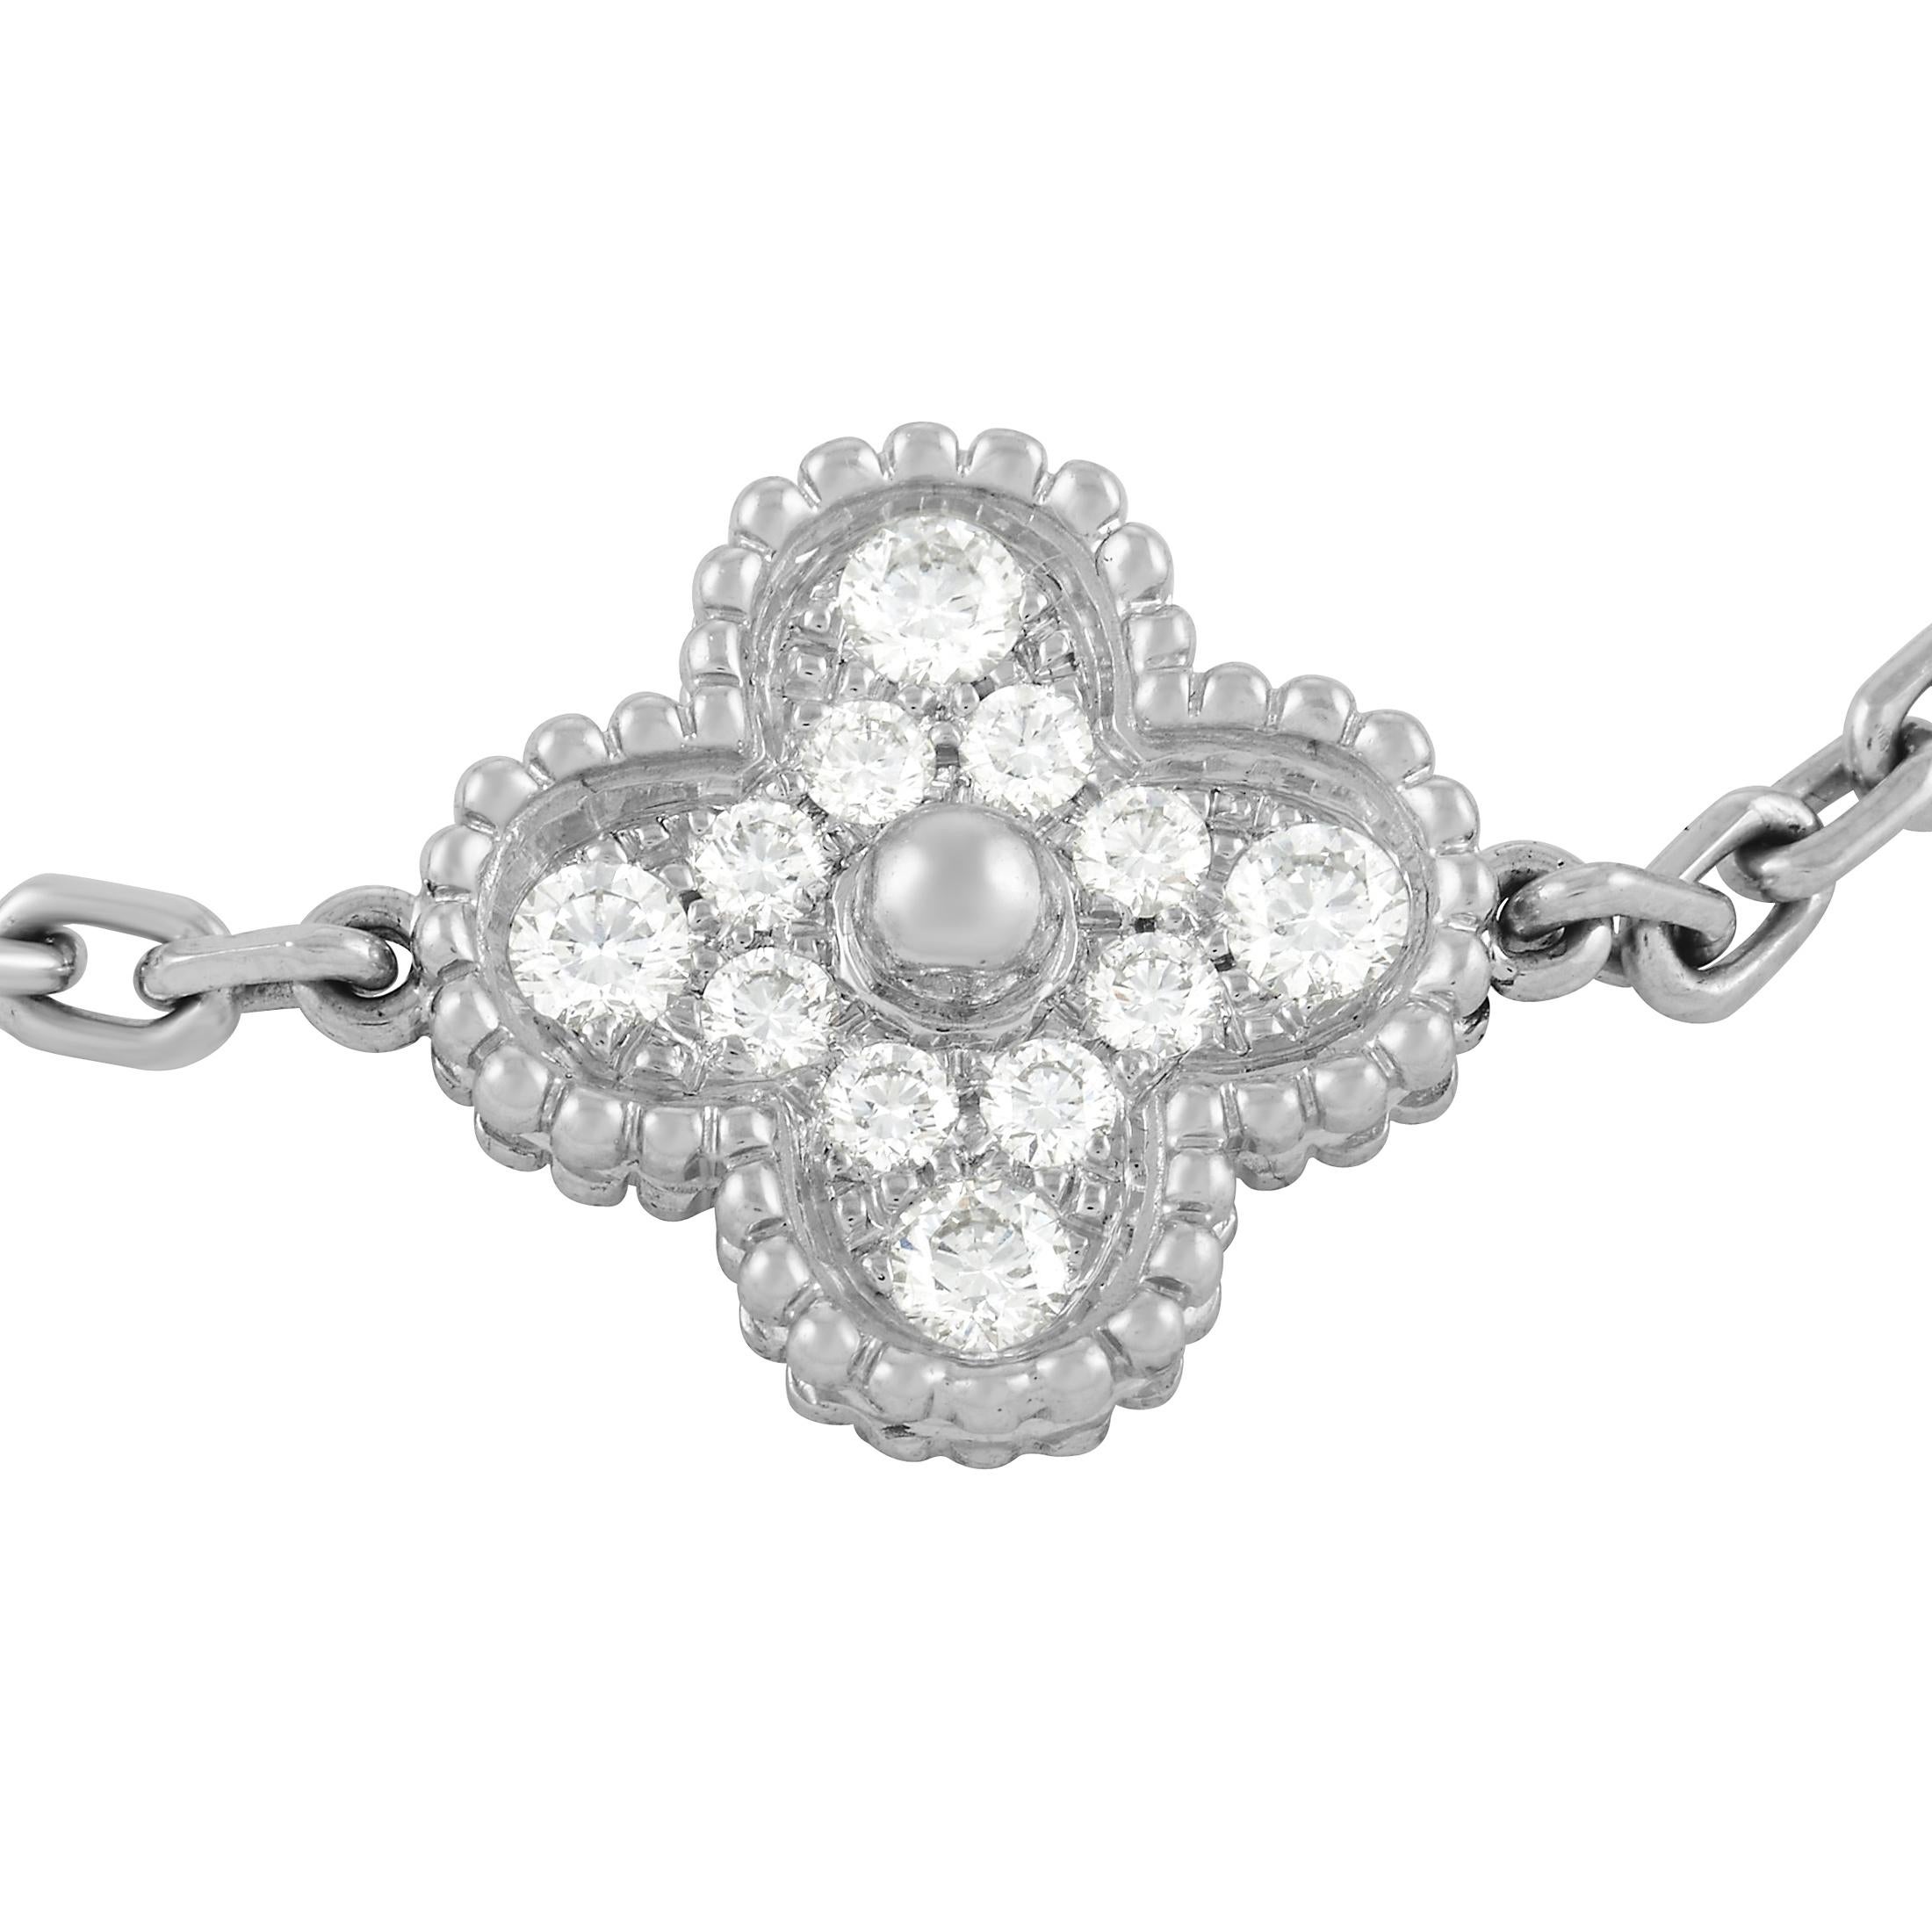 If you consider yourself a minimalist, this sophisticated Van Cleef & Arpels Alhambra bracelet will align with your aesthetic. Made from decadent 18K White Gold, this 7.5” long bracelet is accented by 5 of the brand’s iconic clovers. An impressive